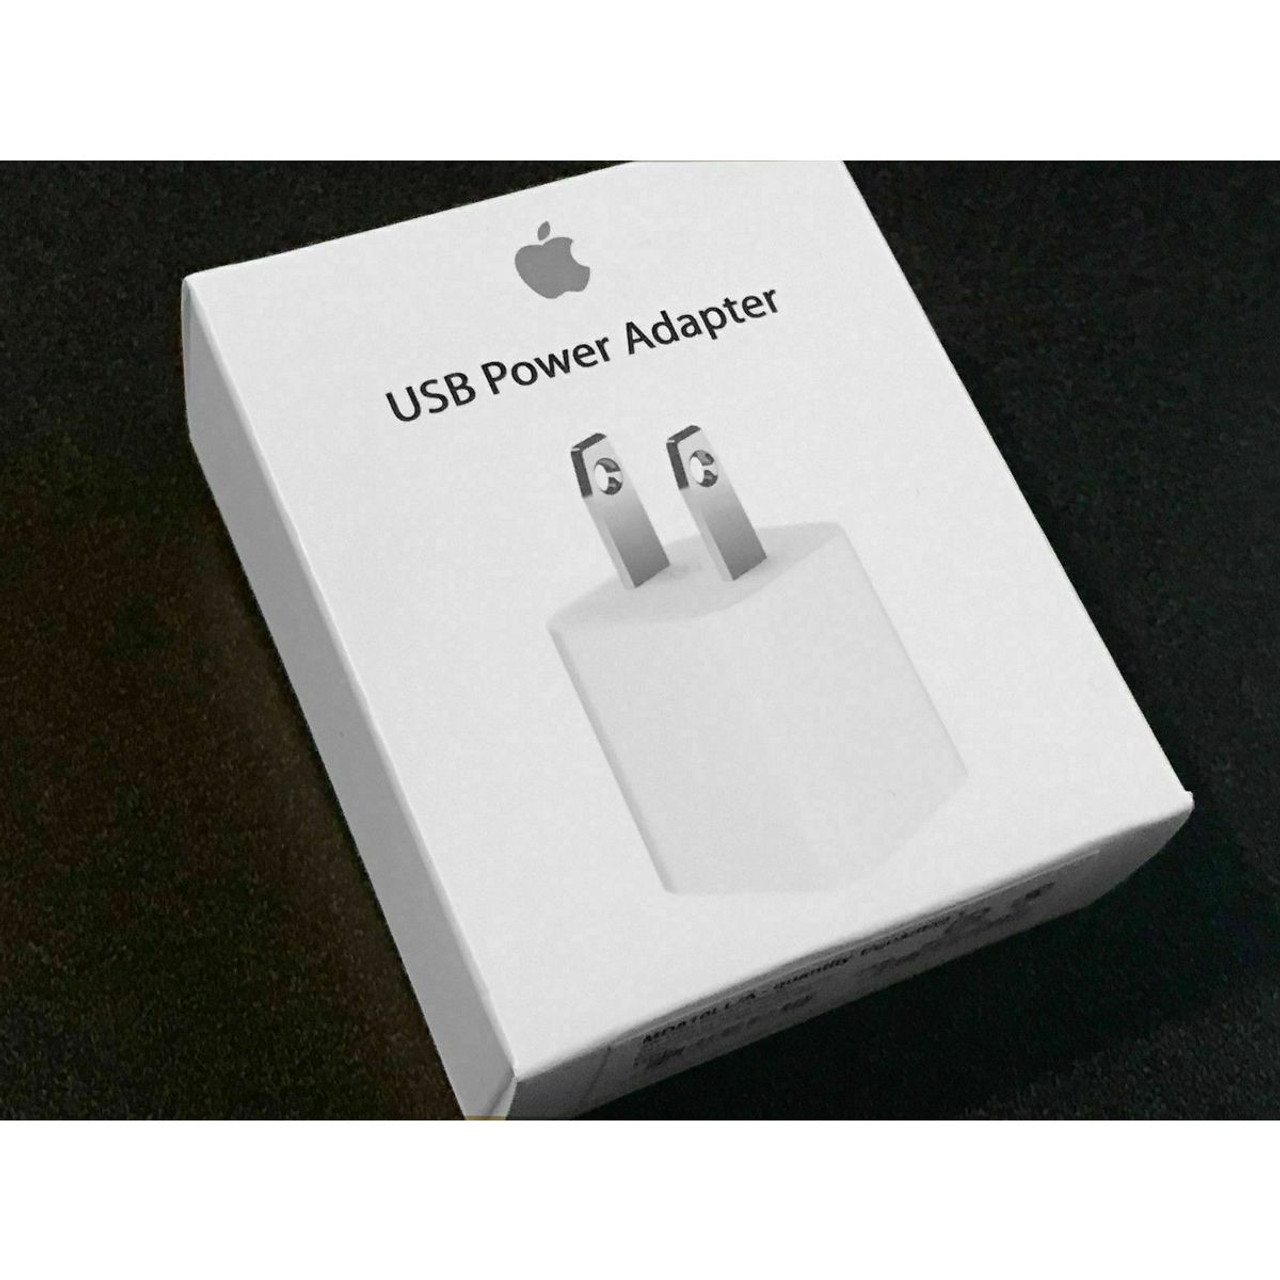 Apple 5W USB Power Adapter MD810LL/A product image